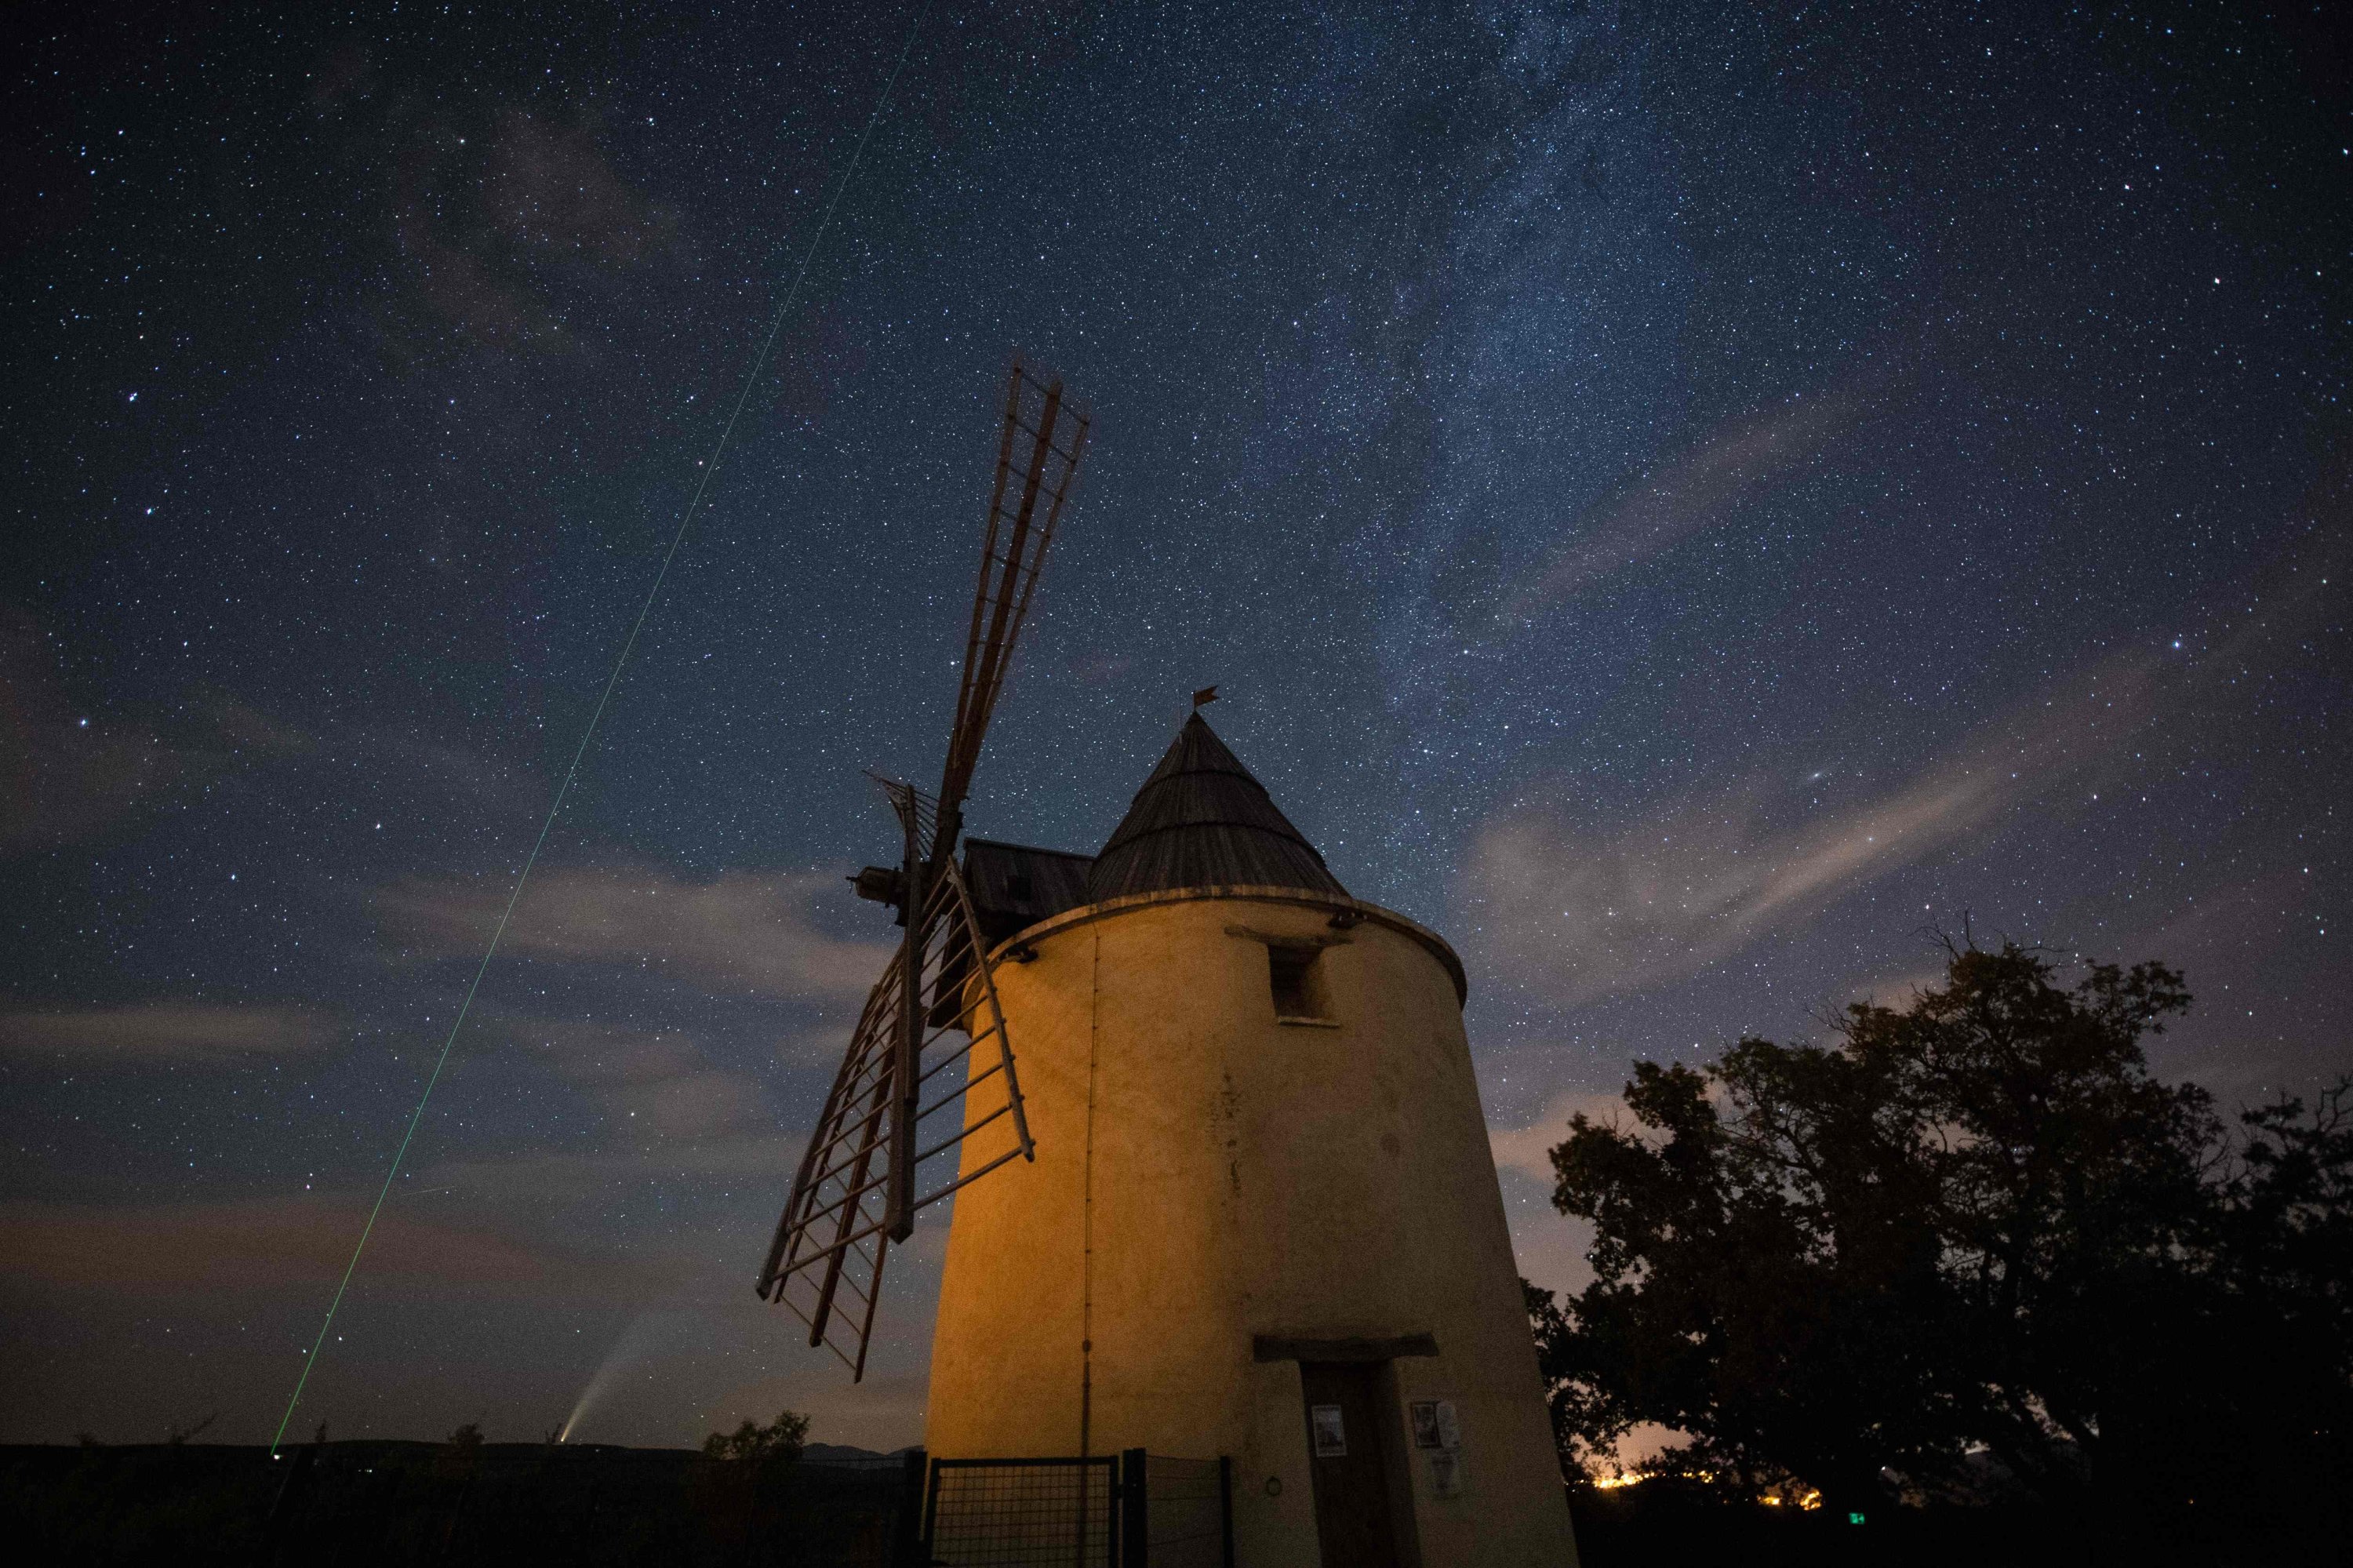 A picture taken on July 15, 2020 shows the C/2020 F3 comet (C), also known as "NEOWISE", the green laser beam used by the Haute-Provence Observatory to point celestial objects for studies and researches (L) and the Milky Way (R), with an old windmill in the foreground in Saint-Michel-L